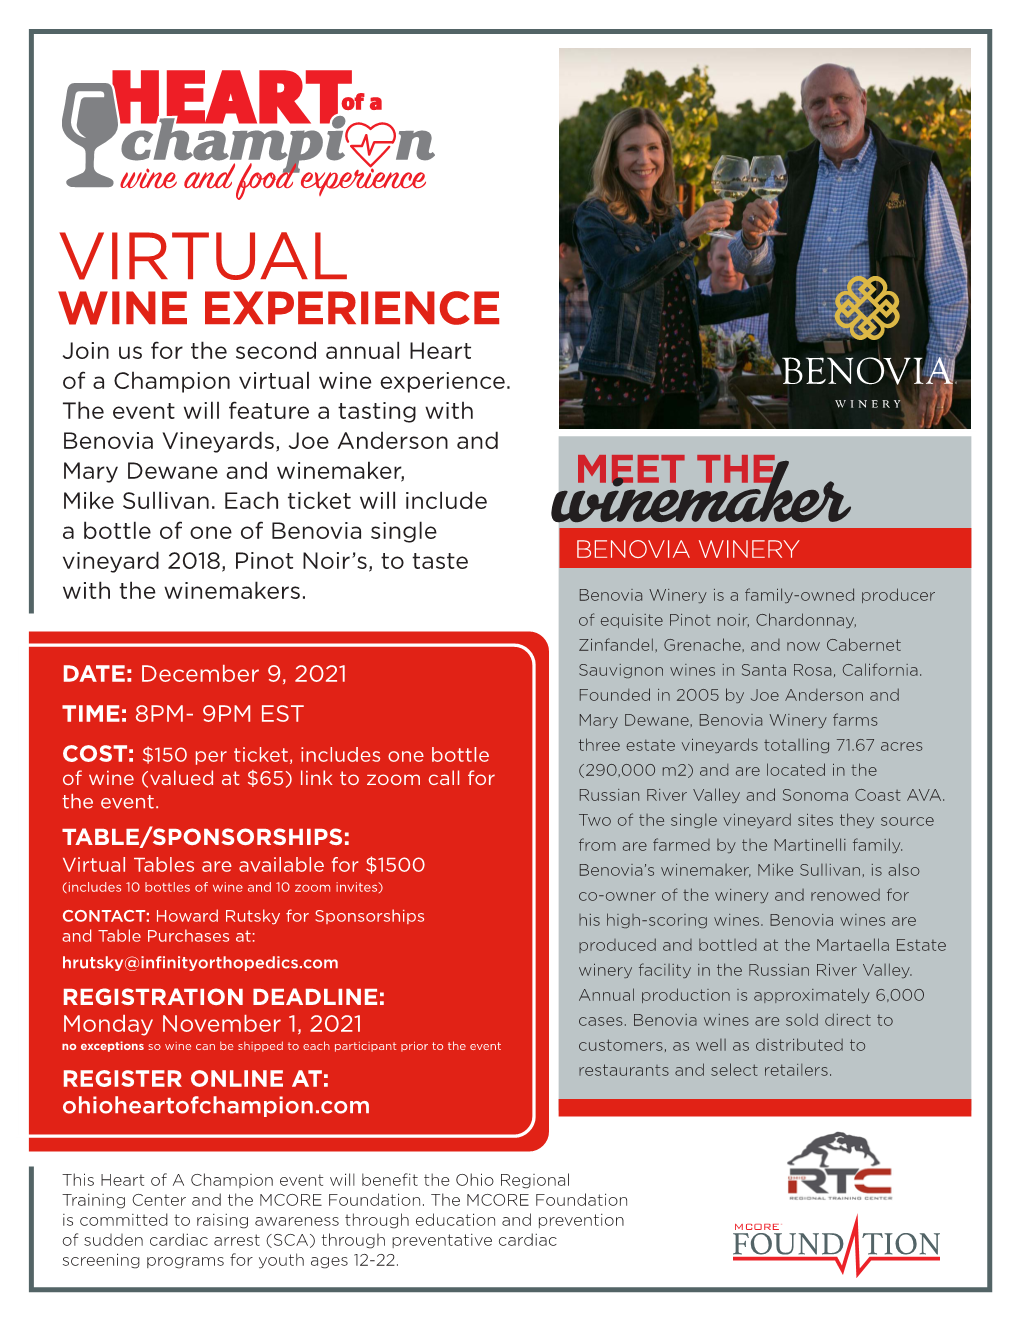 VIRTUAL WINE EXPERIENCE Join Us for the Second Annual Heart of a Champion Virtual Wine Experience